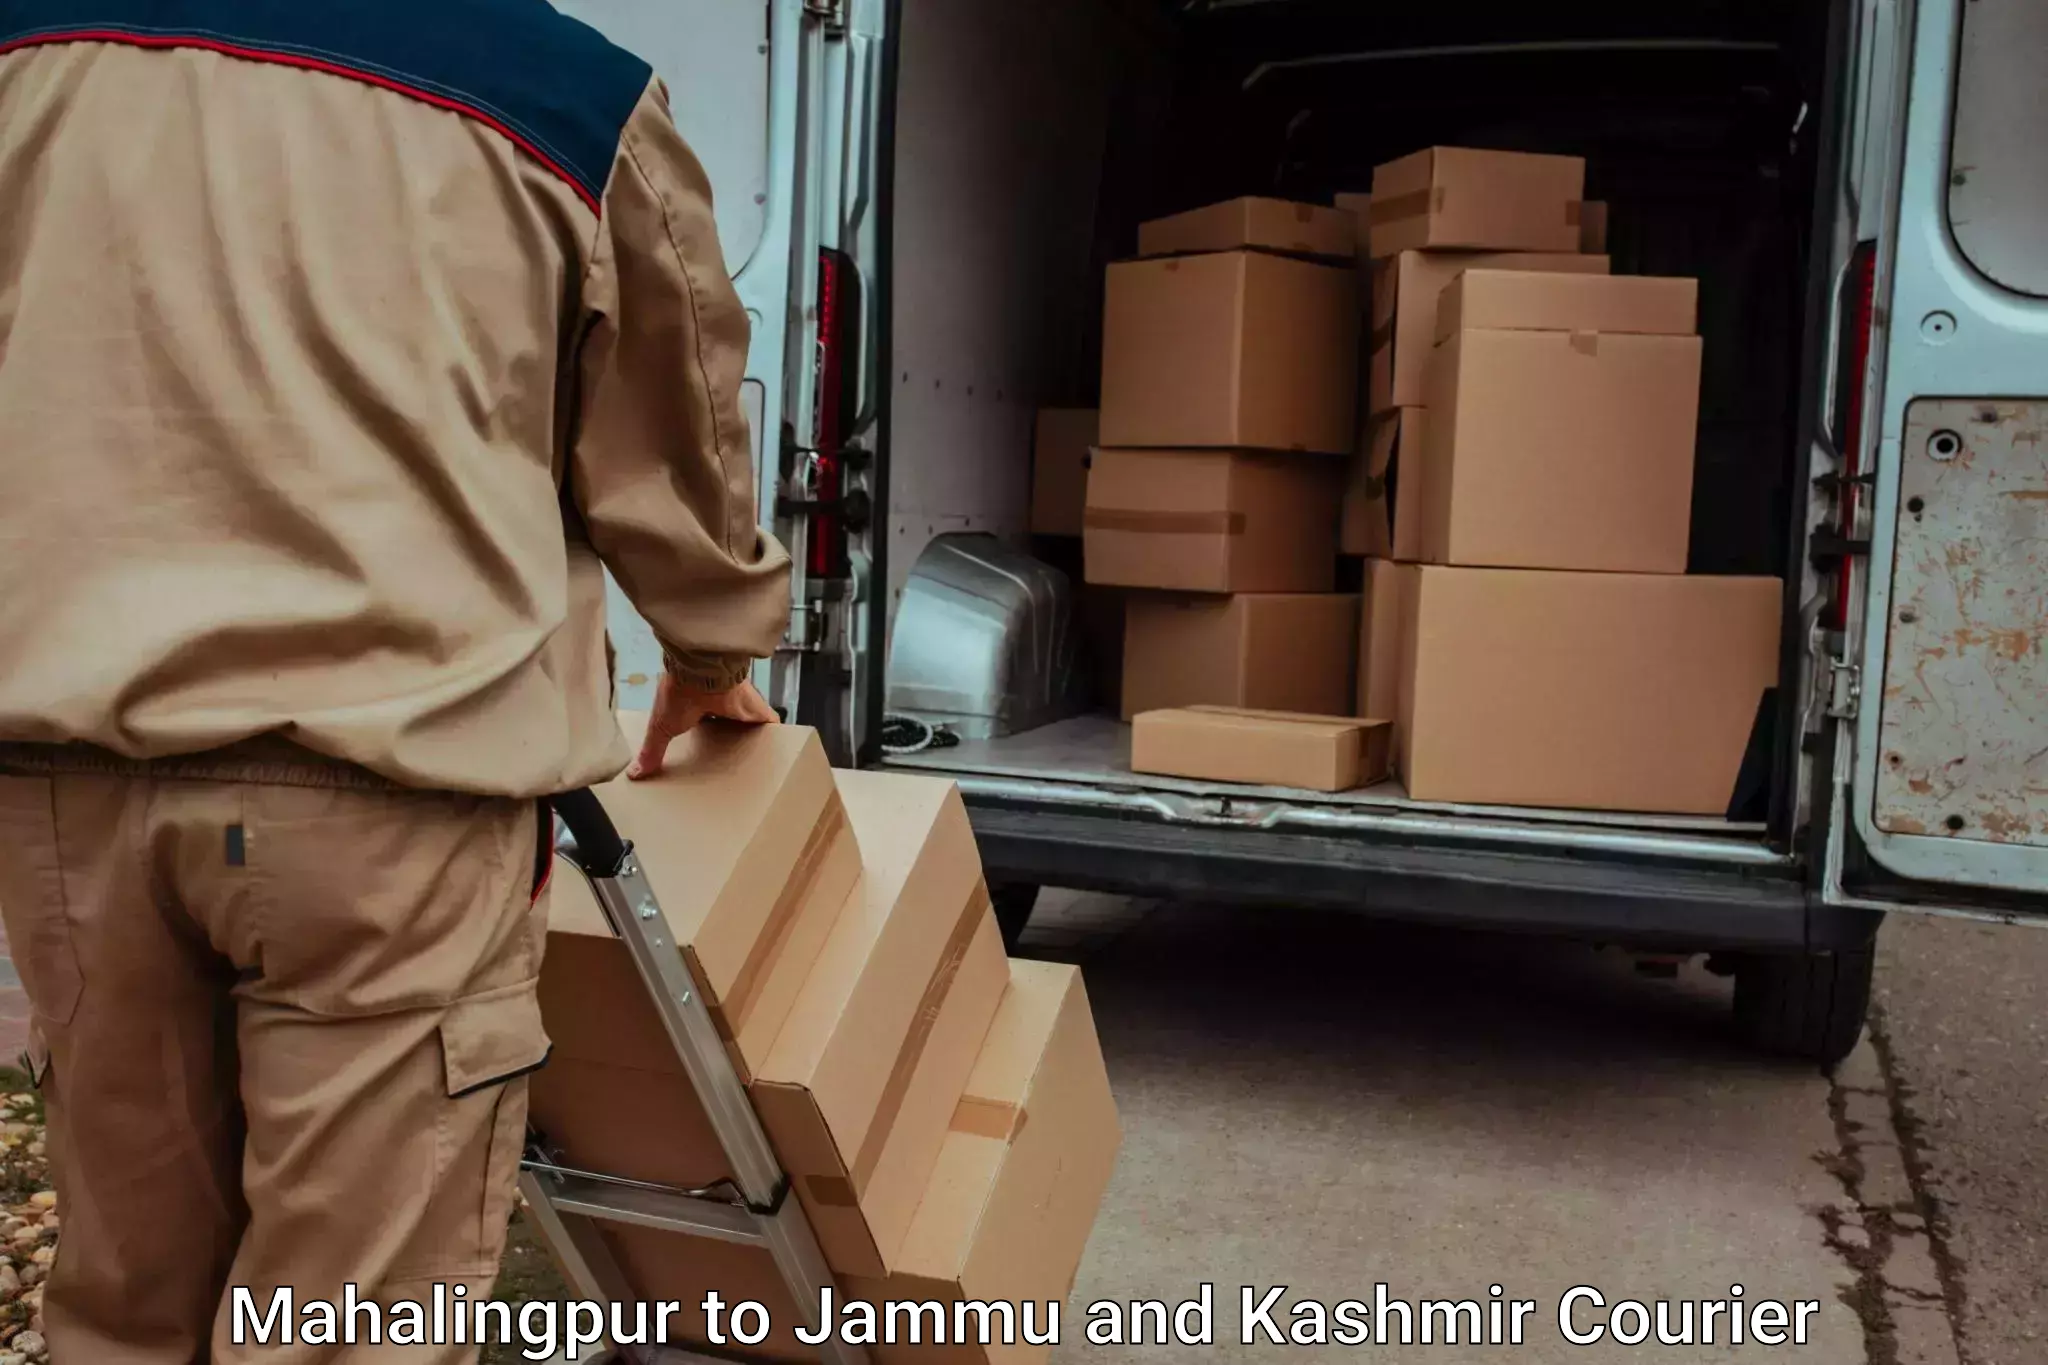 Trusted relocation experts Mahalingpur to Shopian